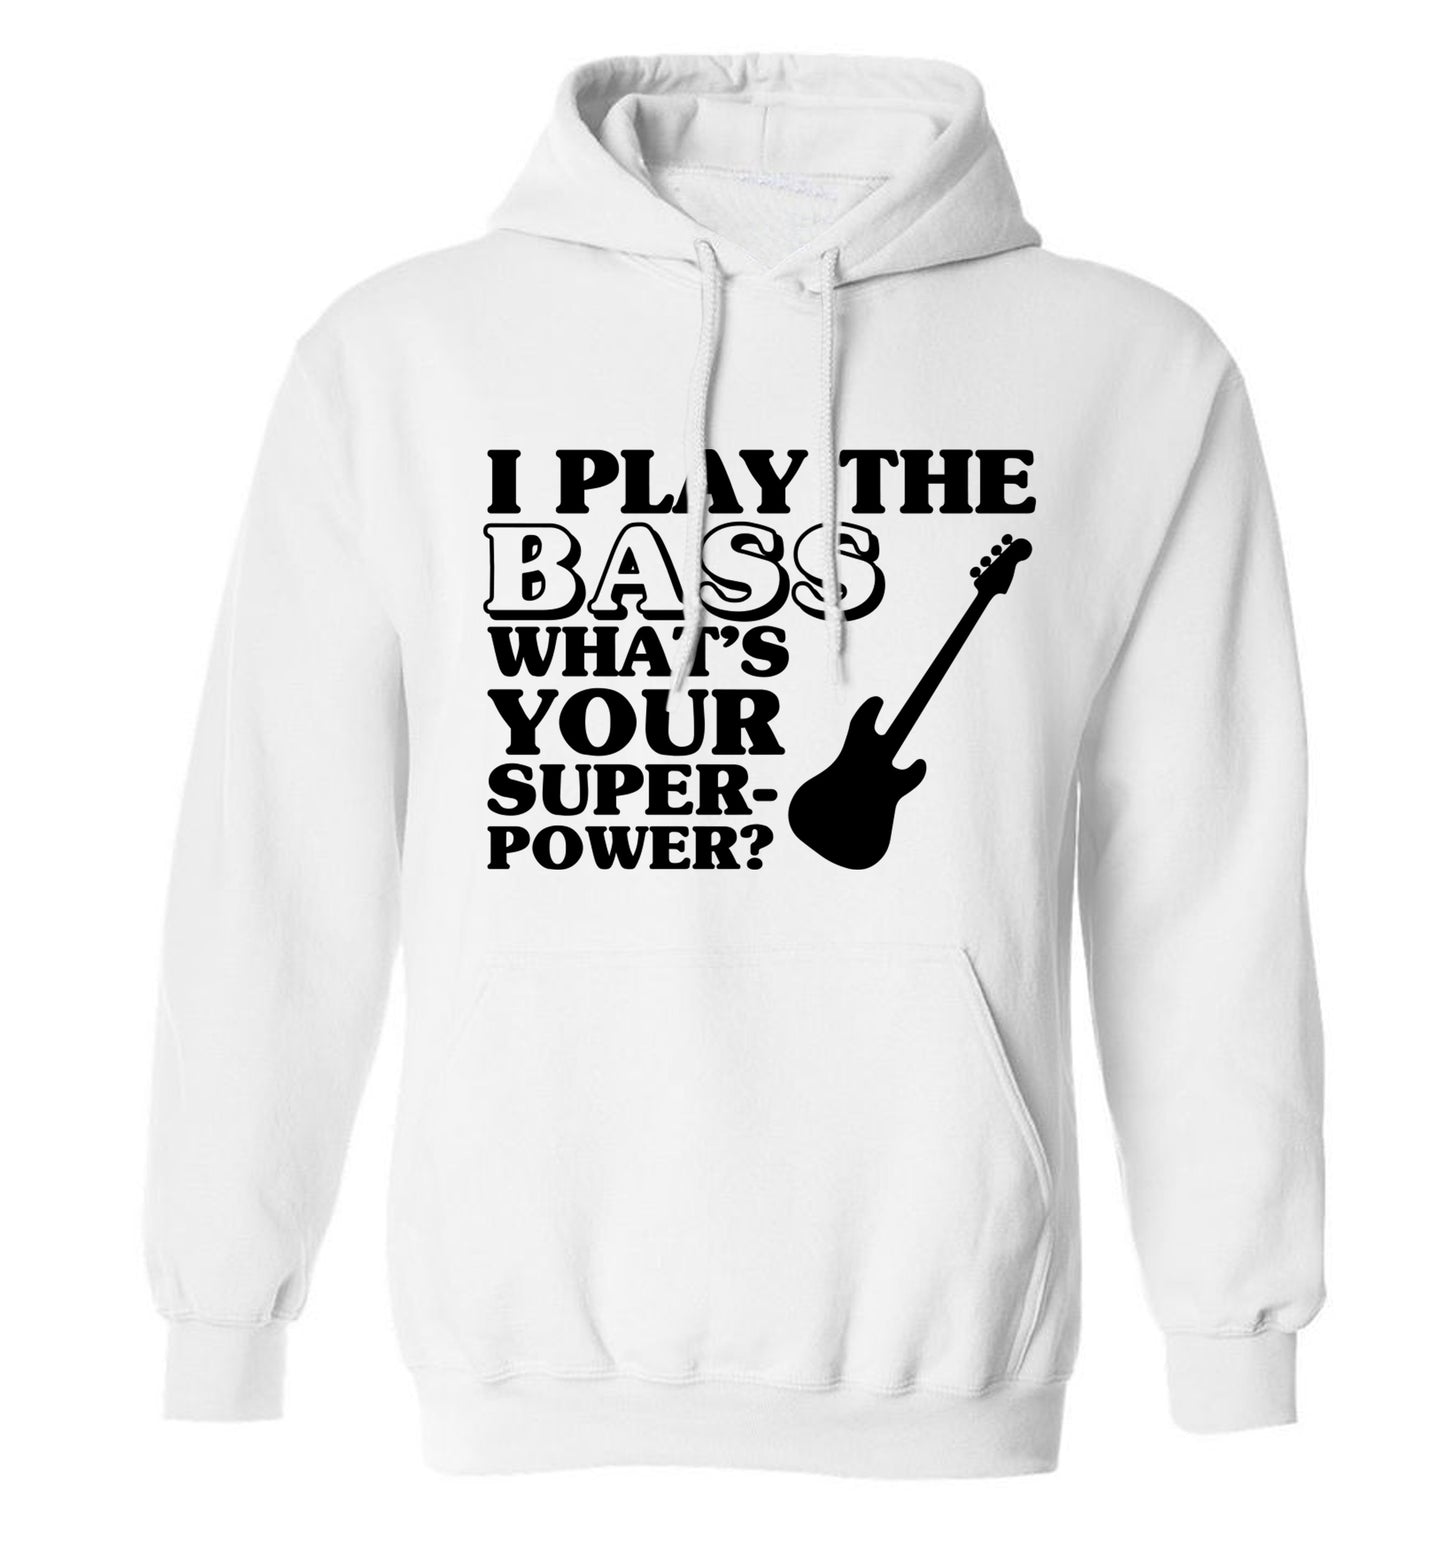 I play the bass what's your superpower? adults unisex white hoodie 2XL